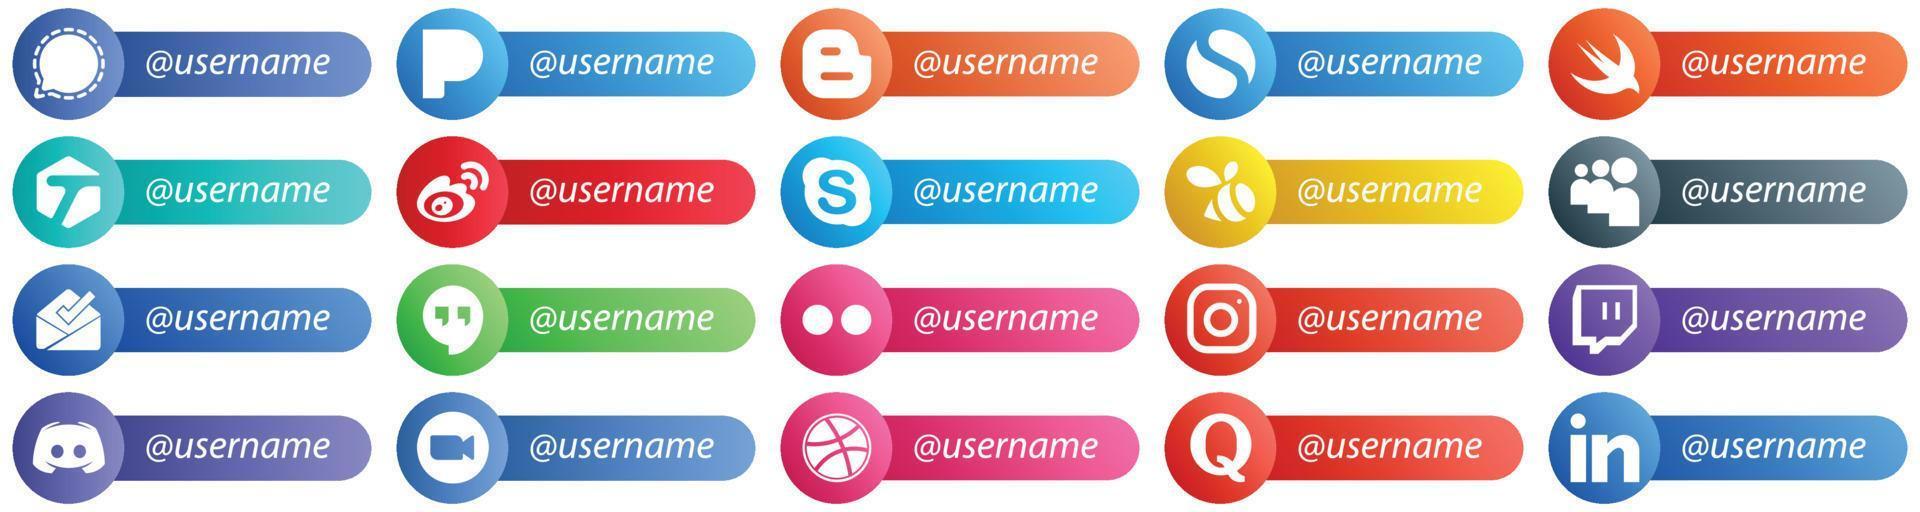 20 Stylish Card Style Follow Me Social Media Icons such as inbox. swarm. tagged and chat icons. Fully editable and versatile vector